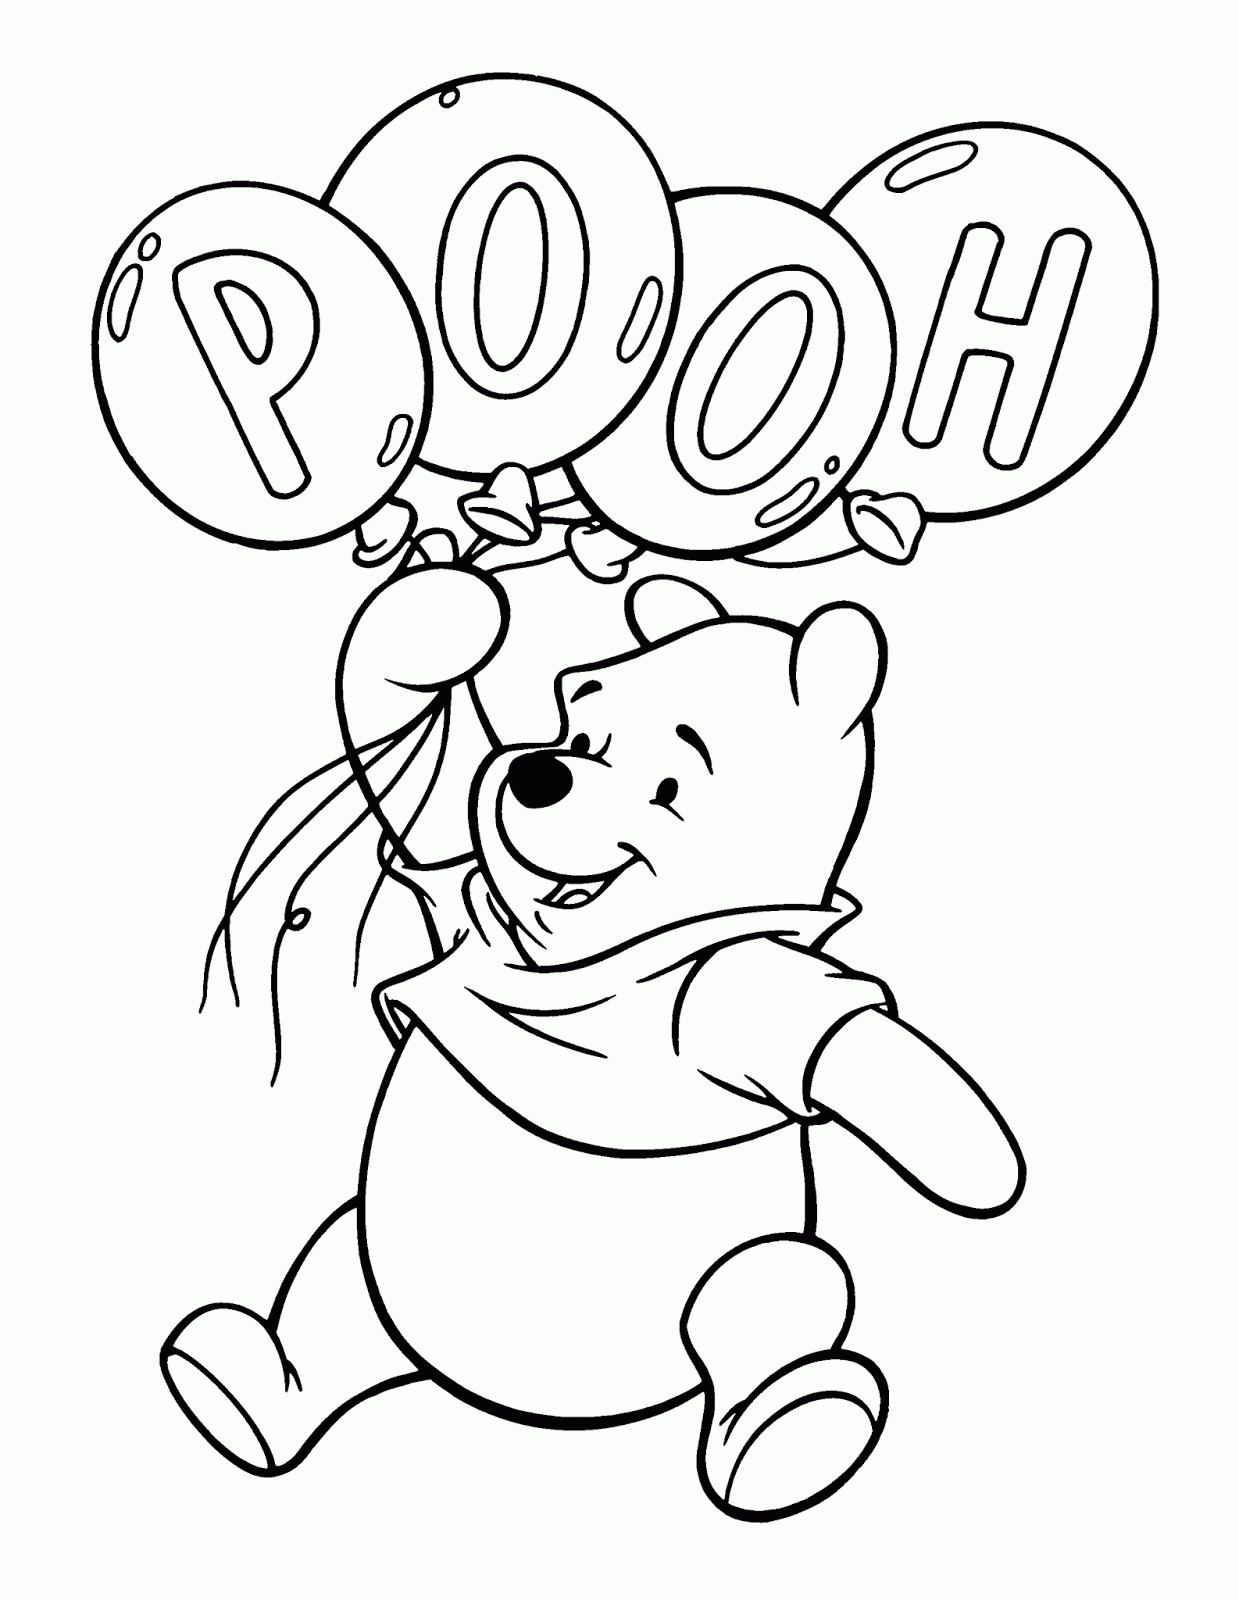 Coloring Book Pages For Winnie The Pooh
 Coloring Pages Winnie the Pooh